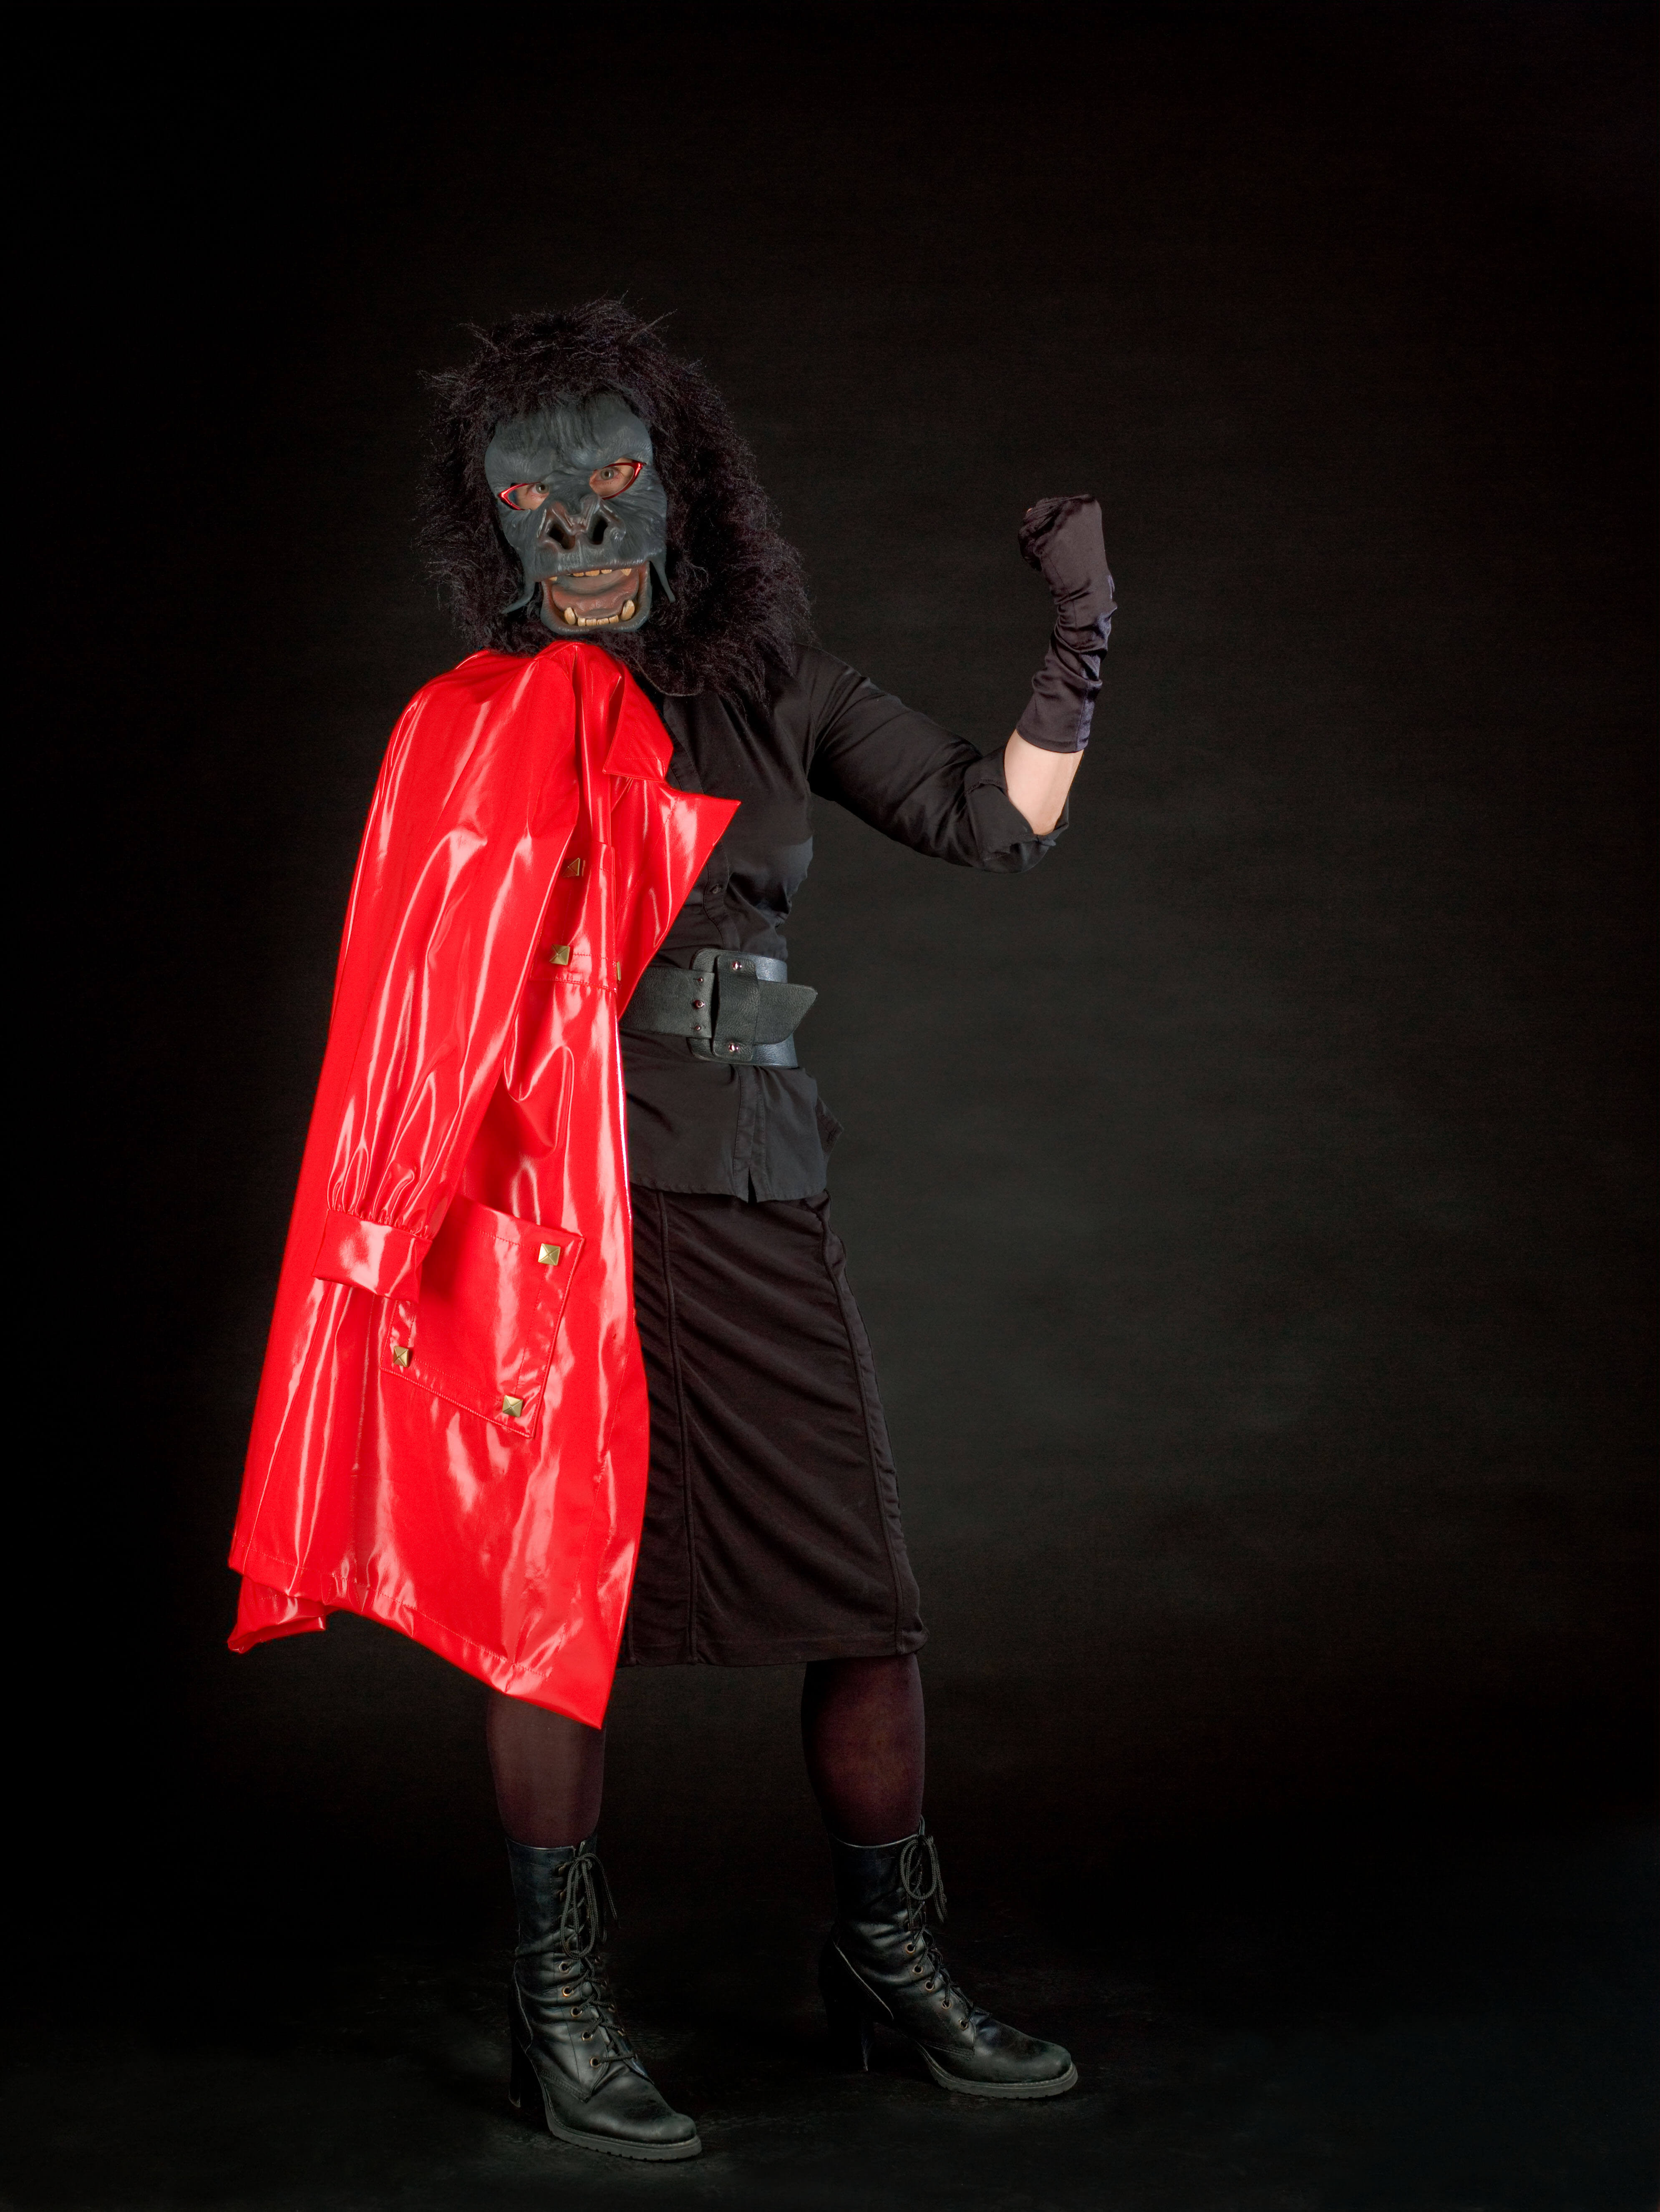 A person wears a gorilla mask, and an all-black outfit, and holds a red latex coat. The background is black.